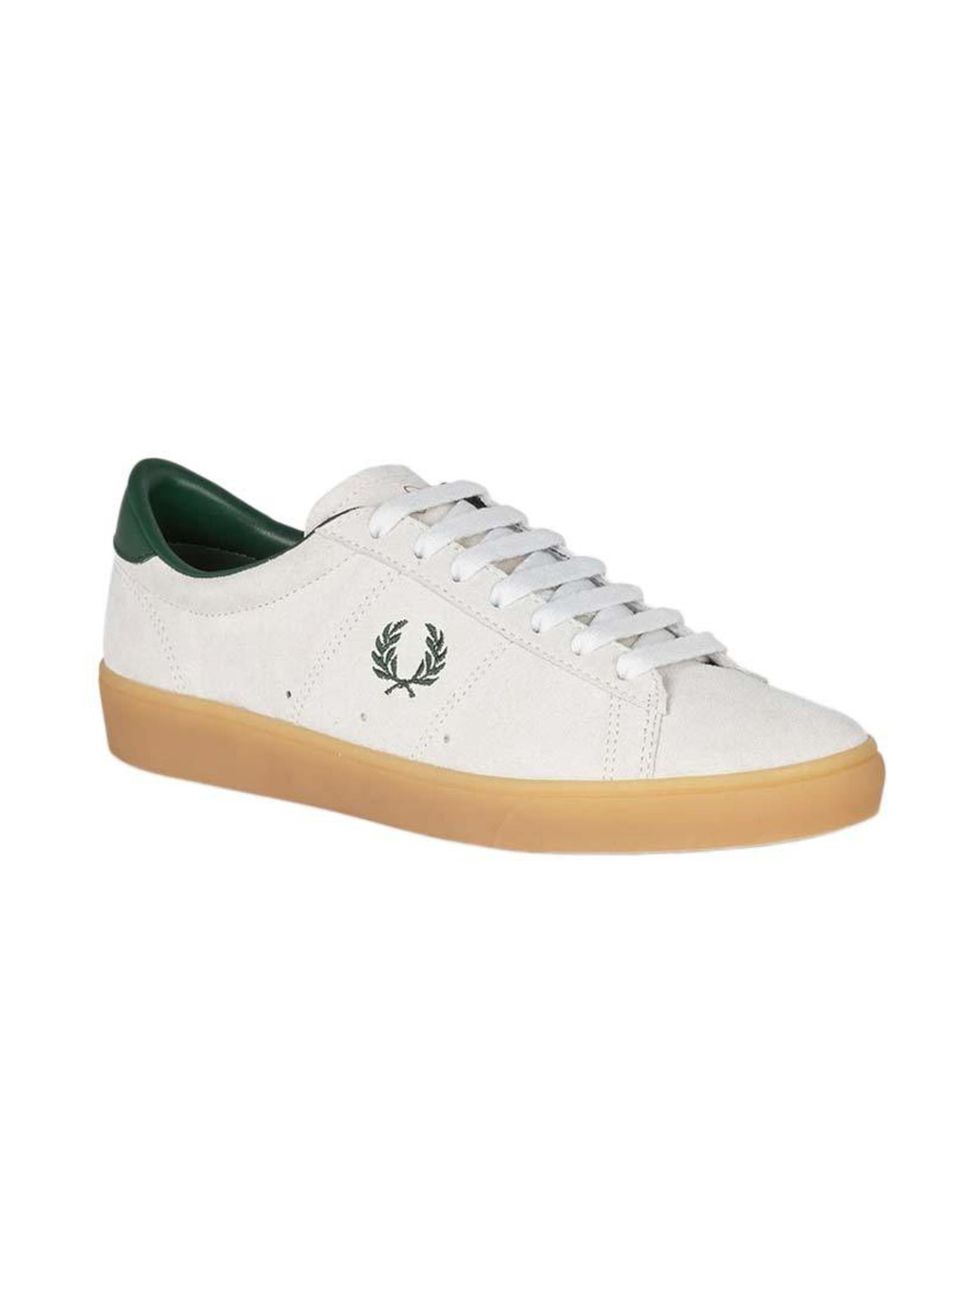 <p>Acting Features Assistant Maybelle Morgan is all about the trainers.</p>

<p> </p>

<p><a href="http://www.fredperry.com/footwear/womens/women-s-spencer-suede-tennis-shoe-b5206w-5.html" target="_blank">Fred Perry</a> trainers, £65</p>